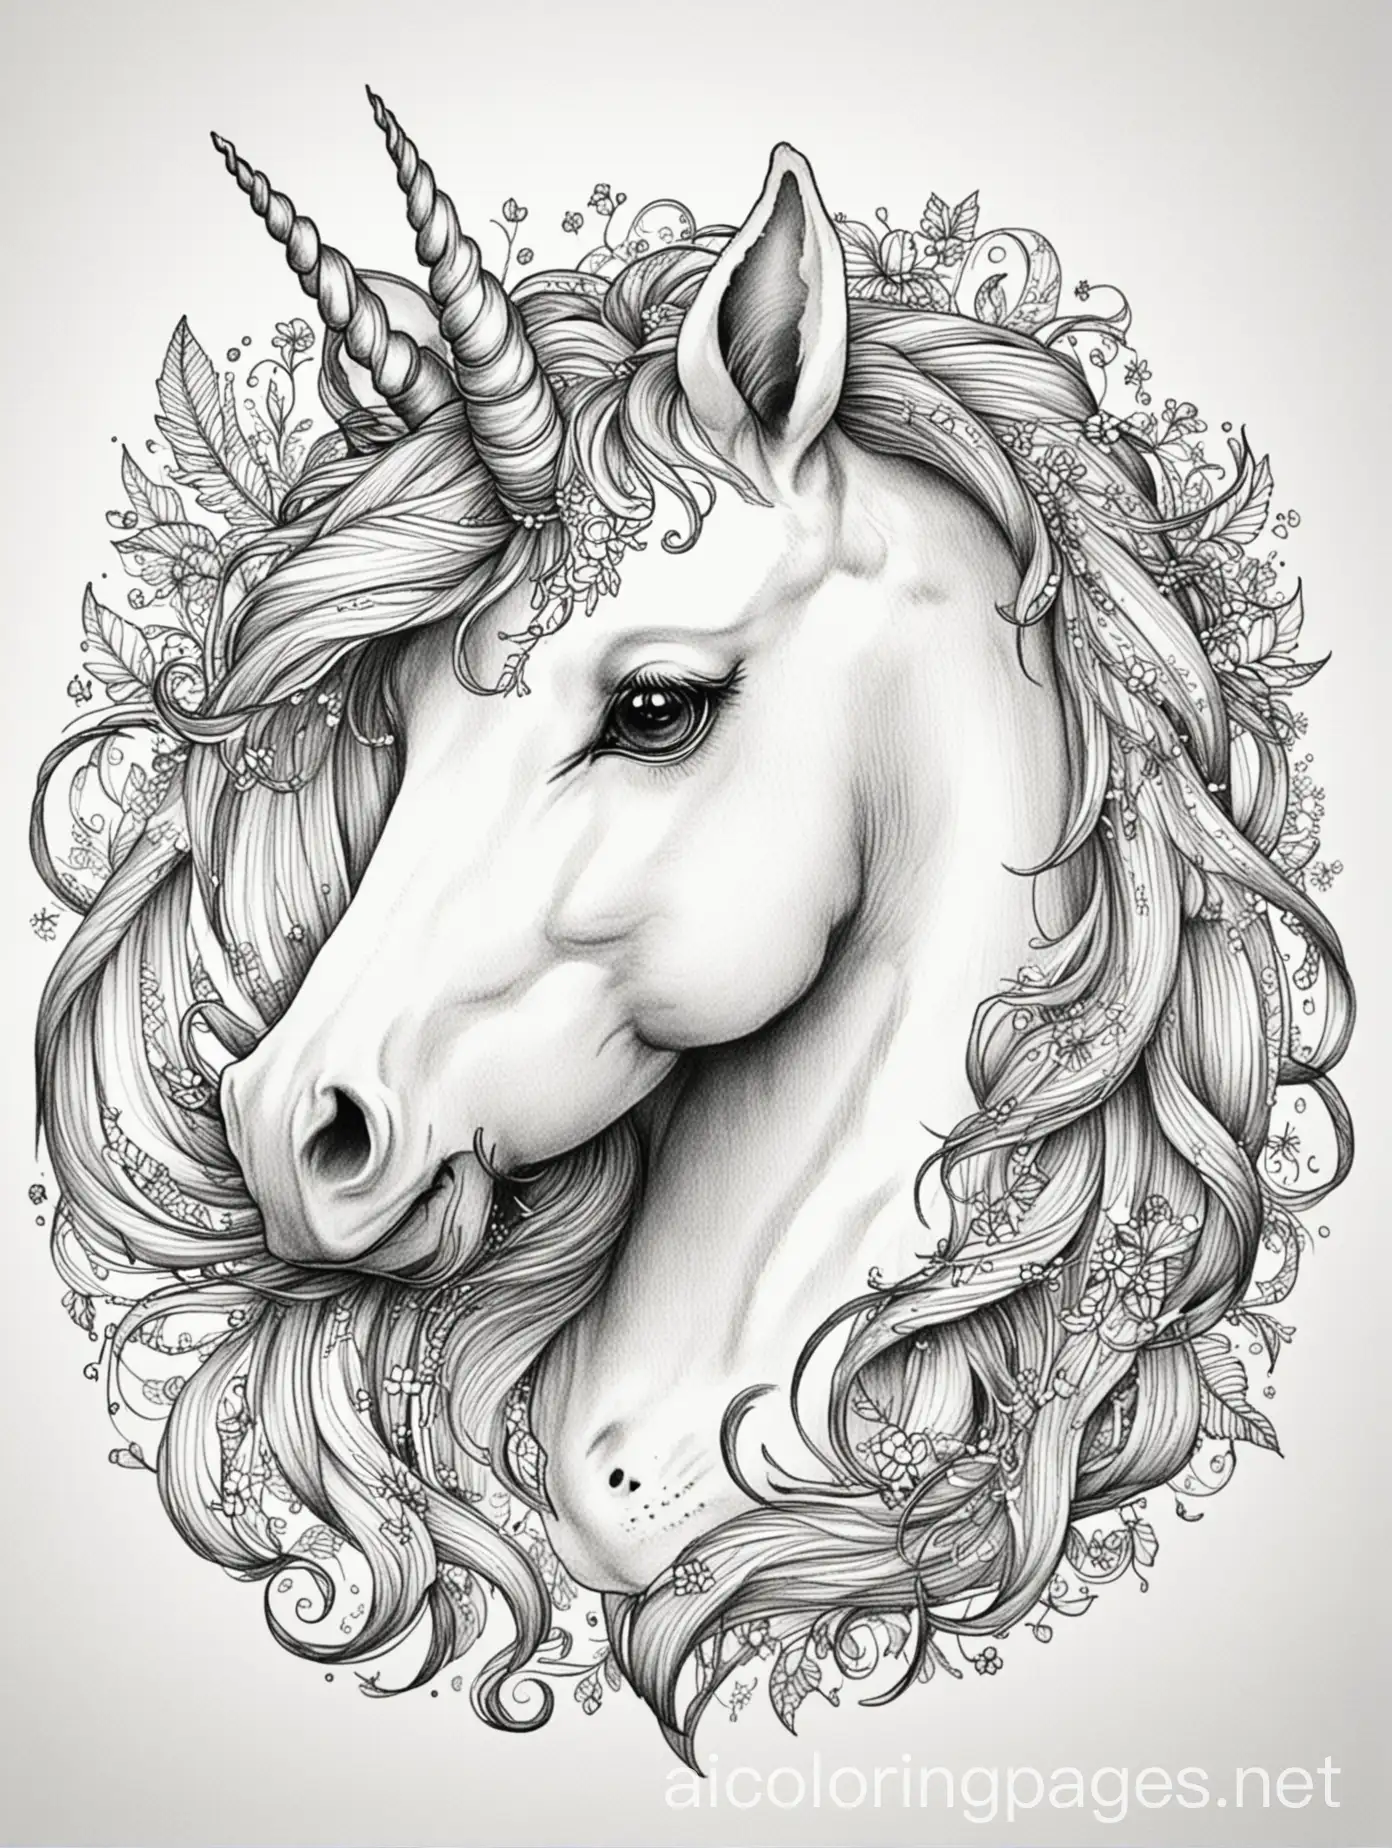 Unicorn-Coloring-Page-with-Simplicity-and-Ample-White-Space